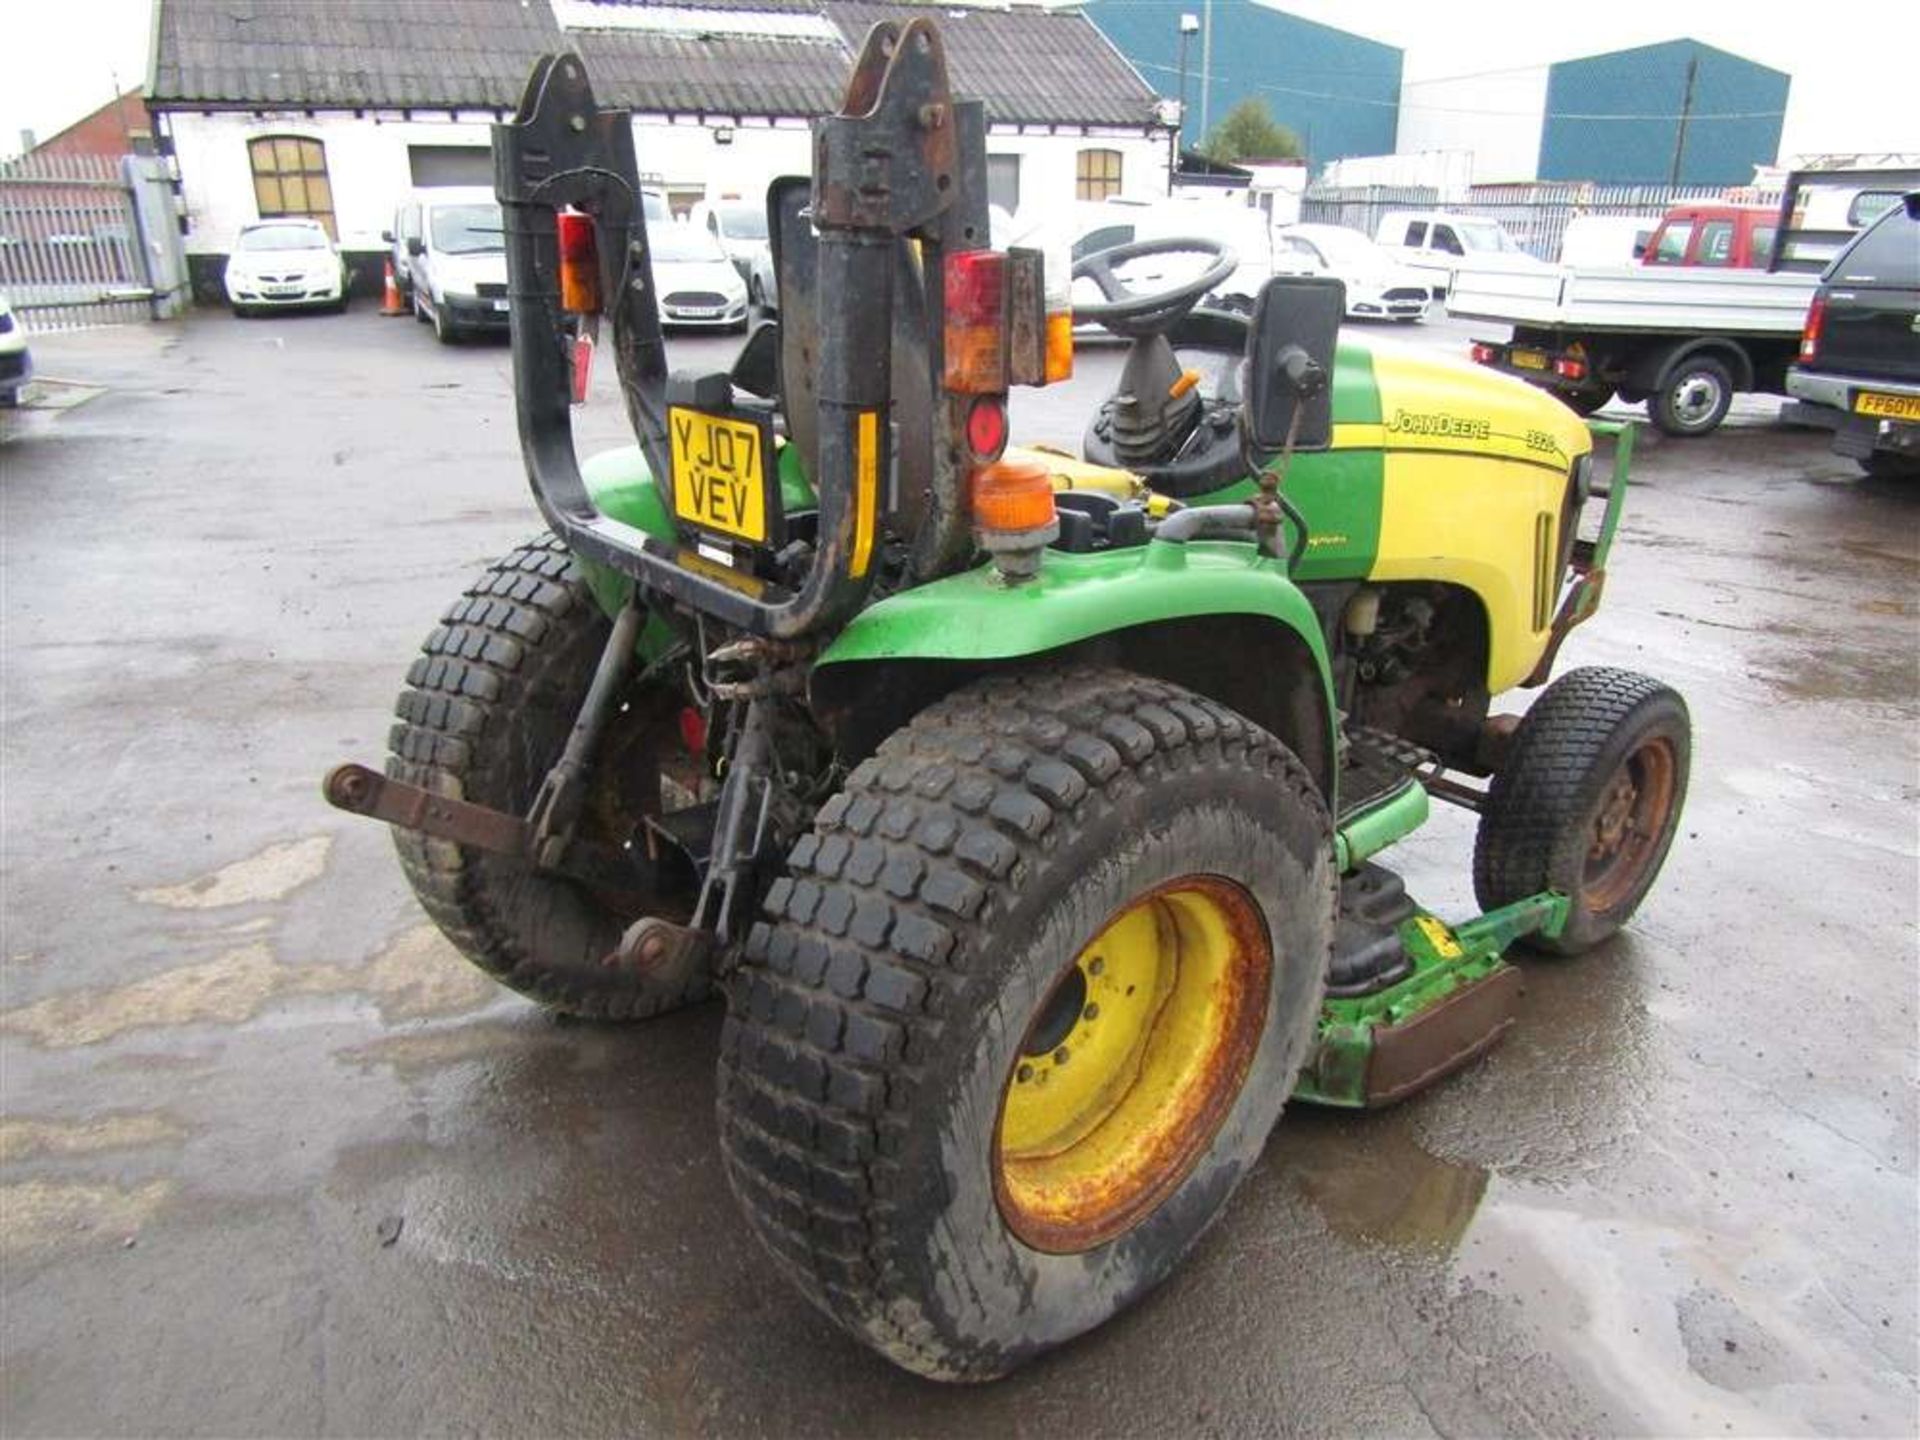 2007 07 reg John Deere 3320 Compact Tractor (Runs but doesn't Drive) (Direct Council) - Image 4 of 4